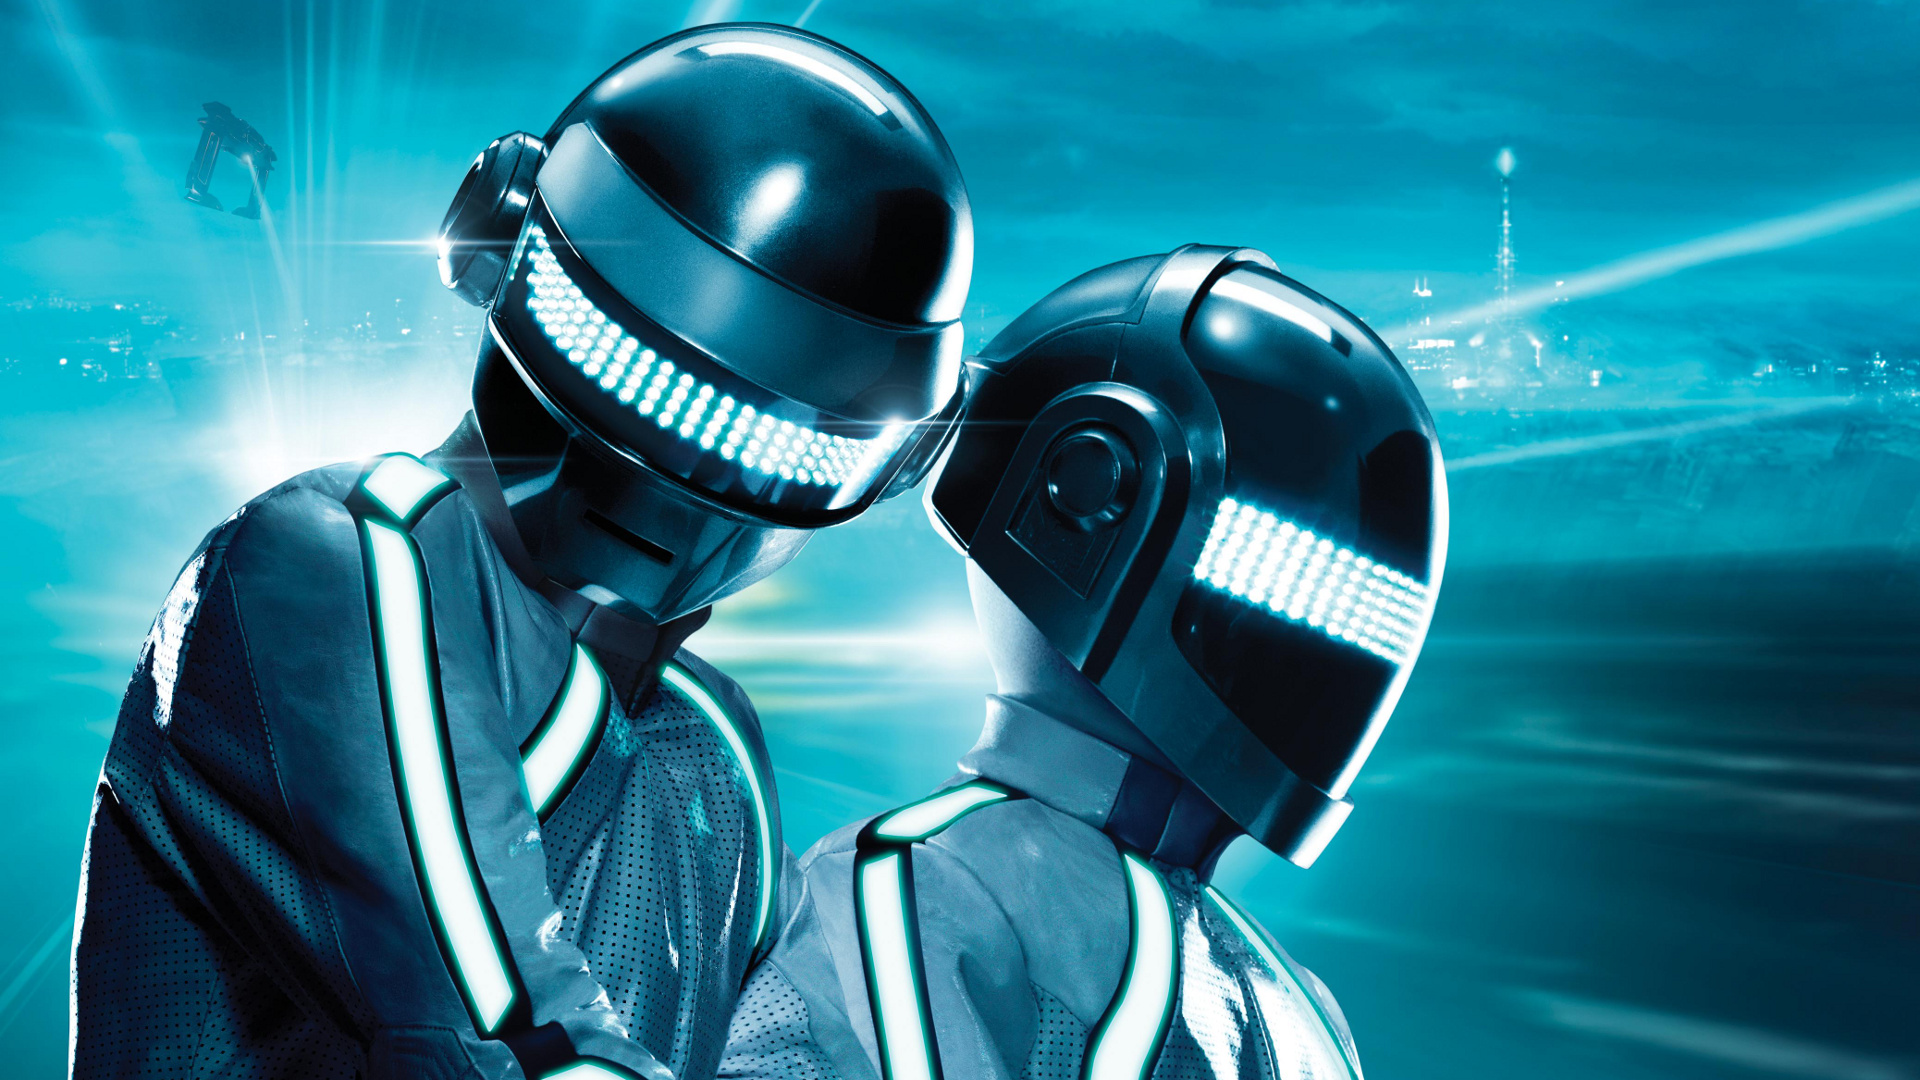 Daft Punk Full Hd Wallpaper And Background Image 1920x1080 Id506265